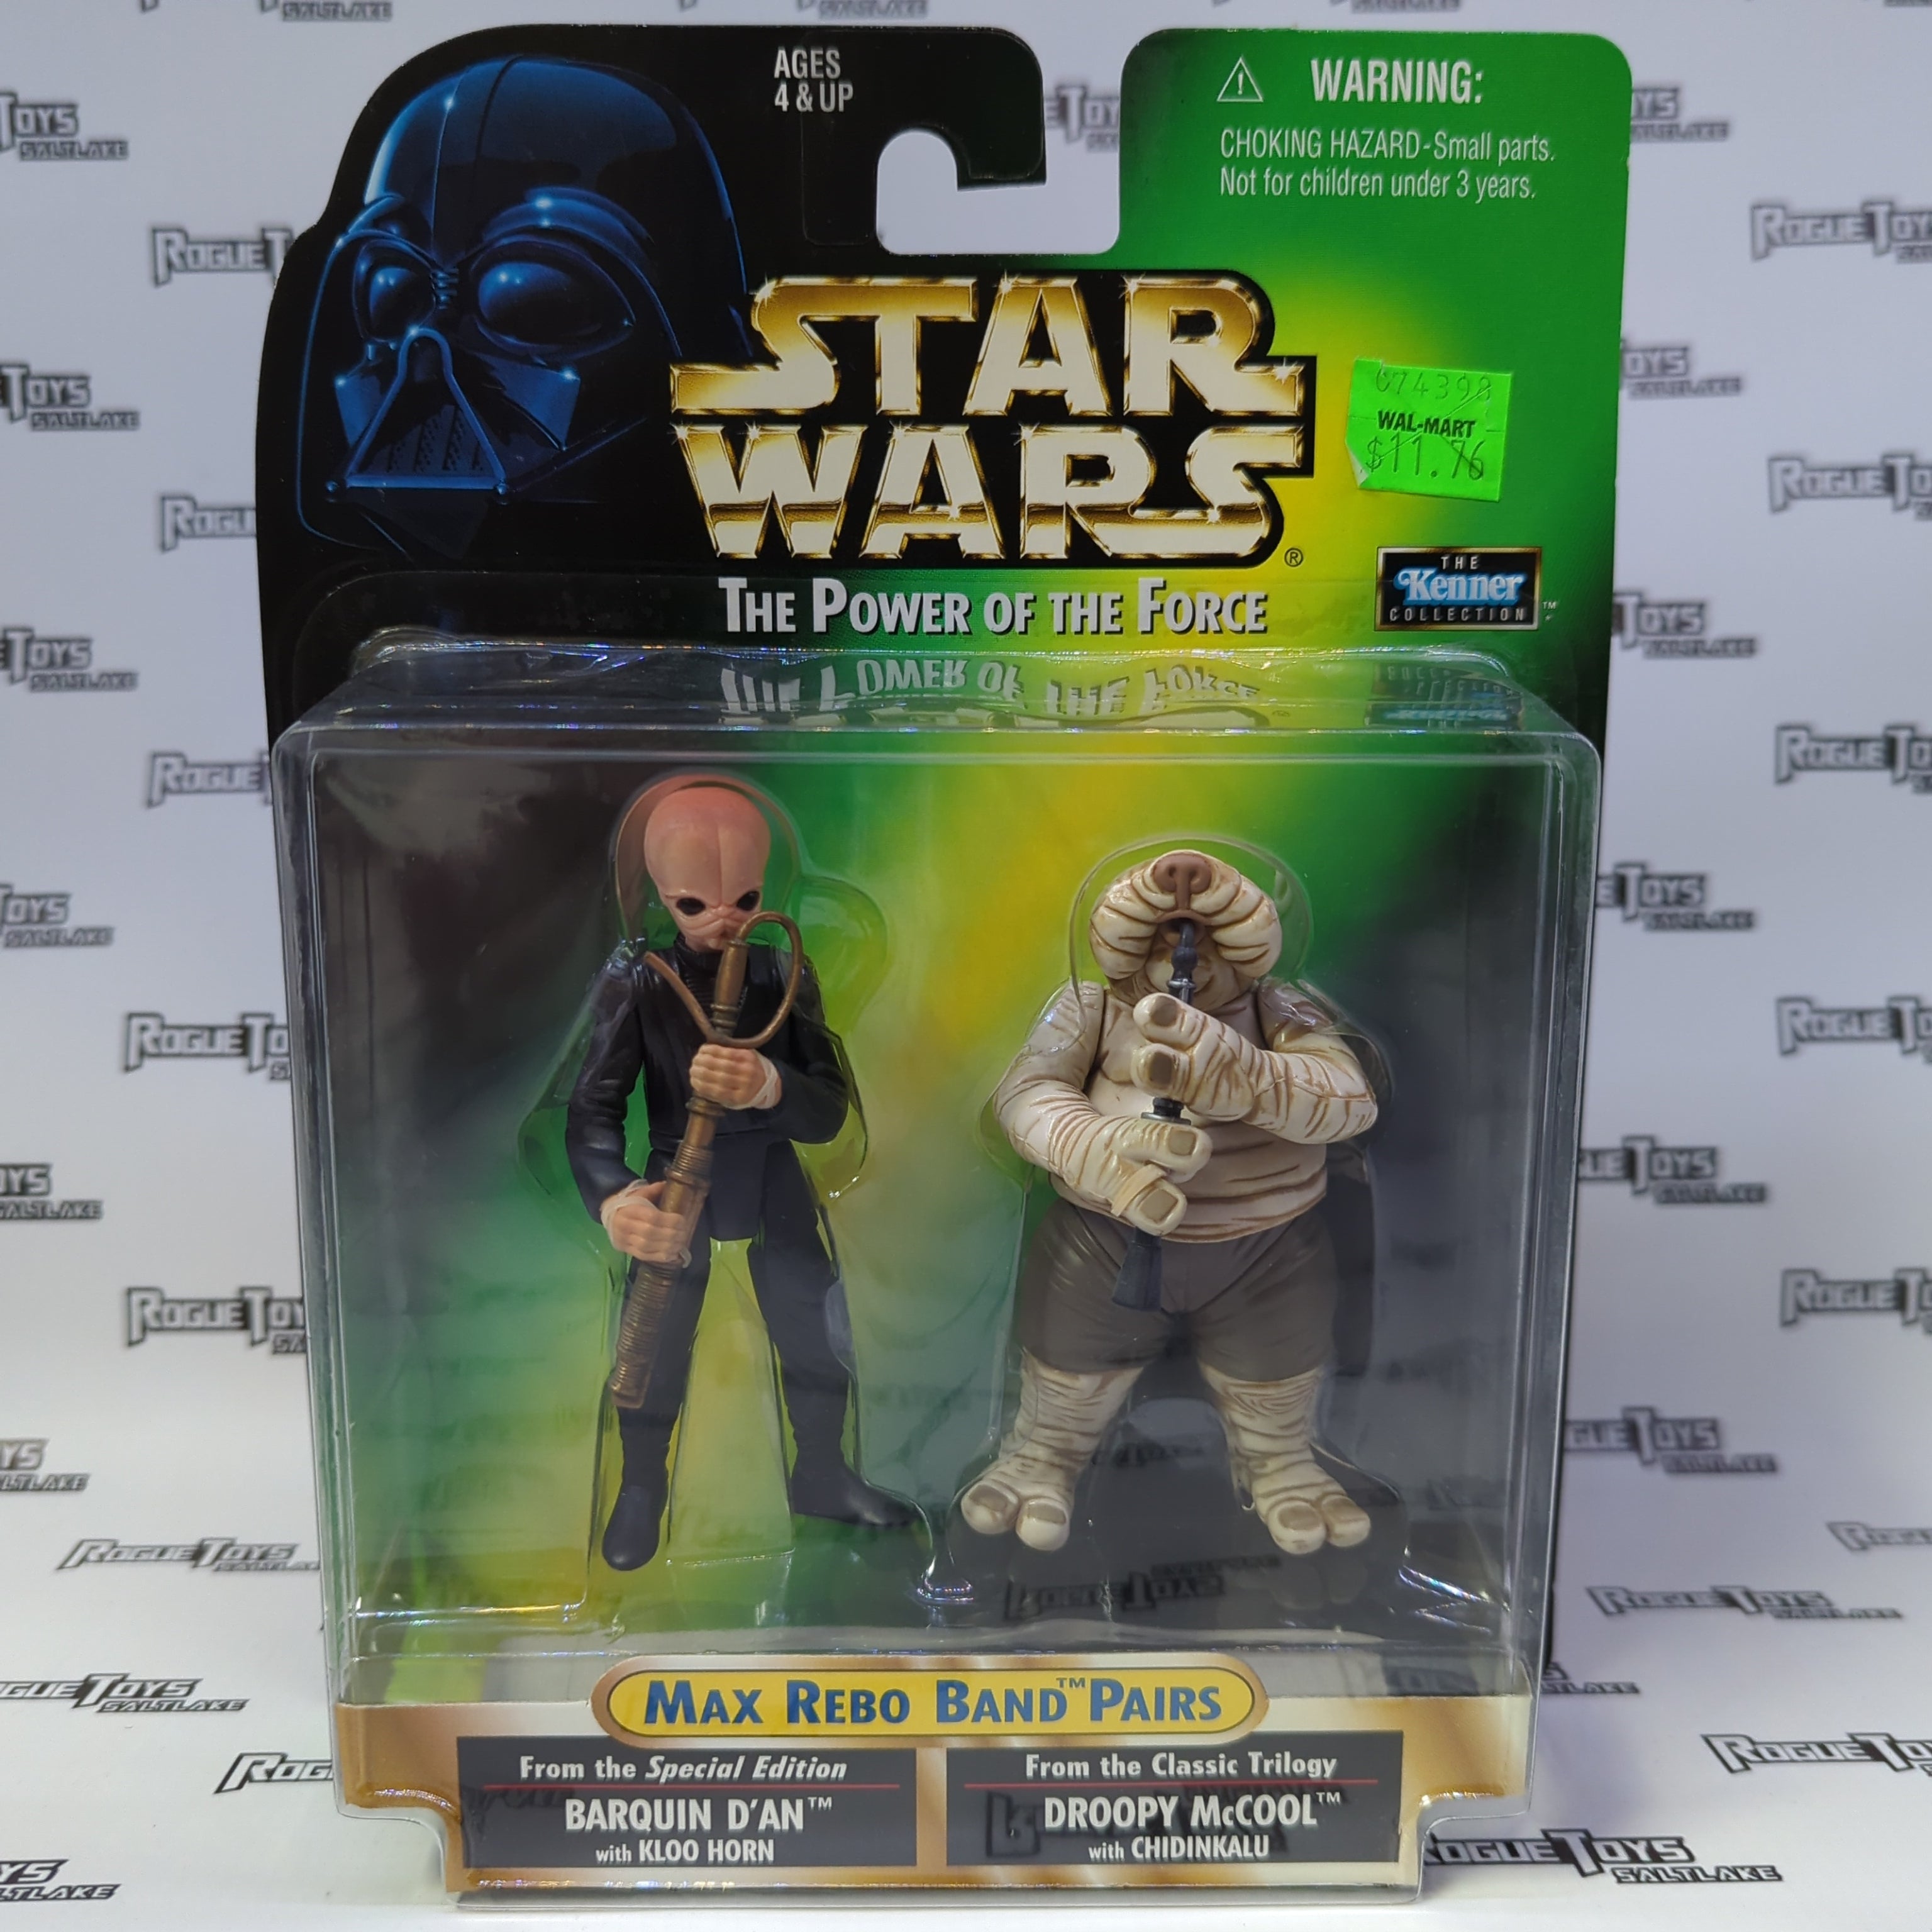 Hasbro Star Wars The Power of the Force Max Rebo Band Pairs Barquin D'an & Droopy McCool